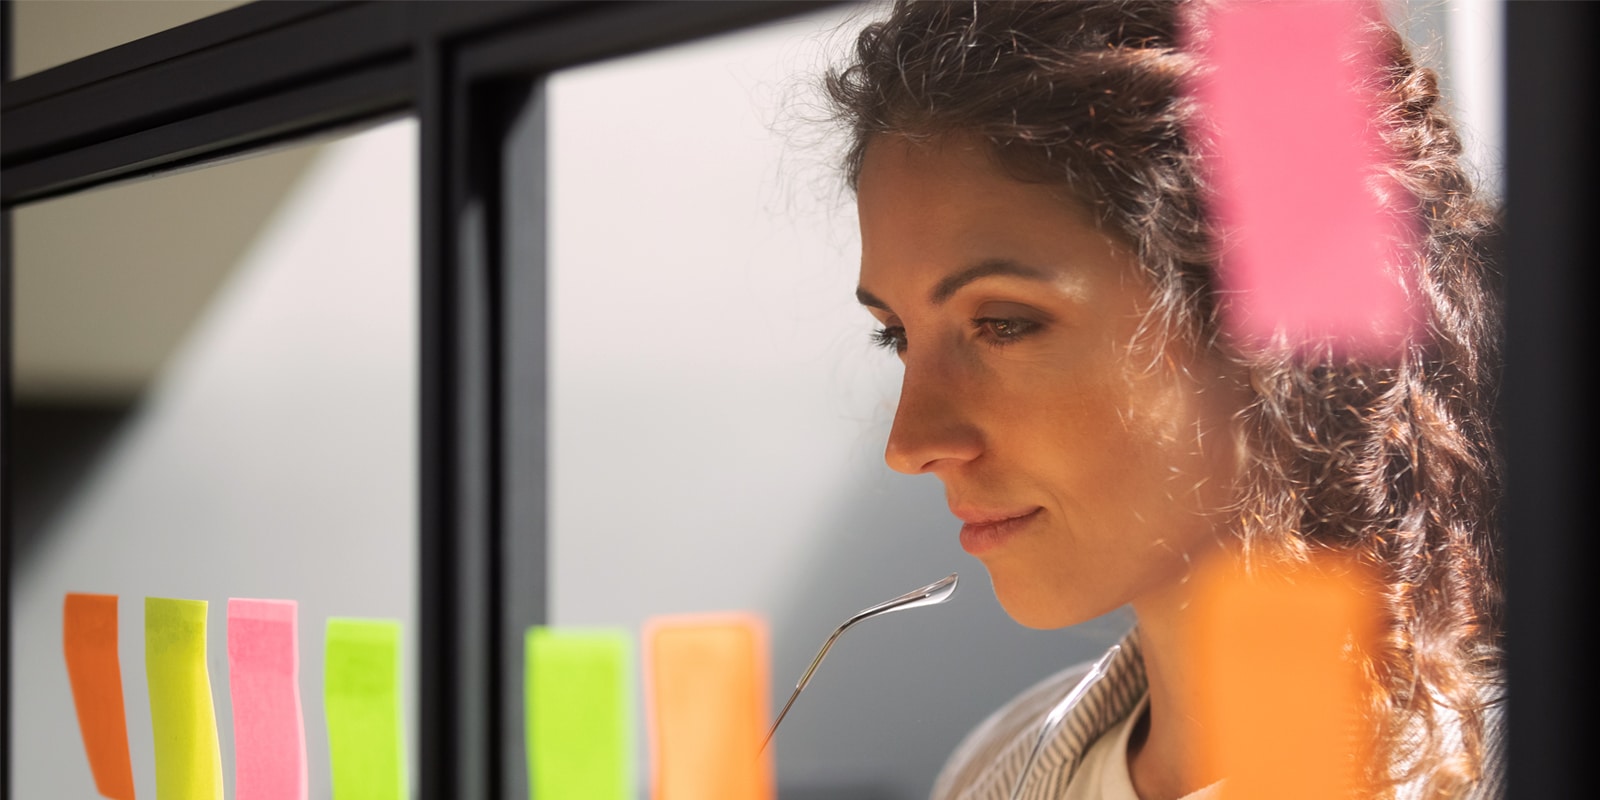 An image of a woman looking at post-it notes and under deep contemplation